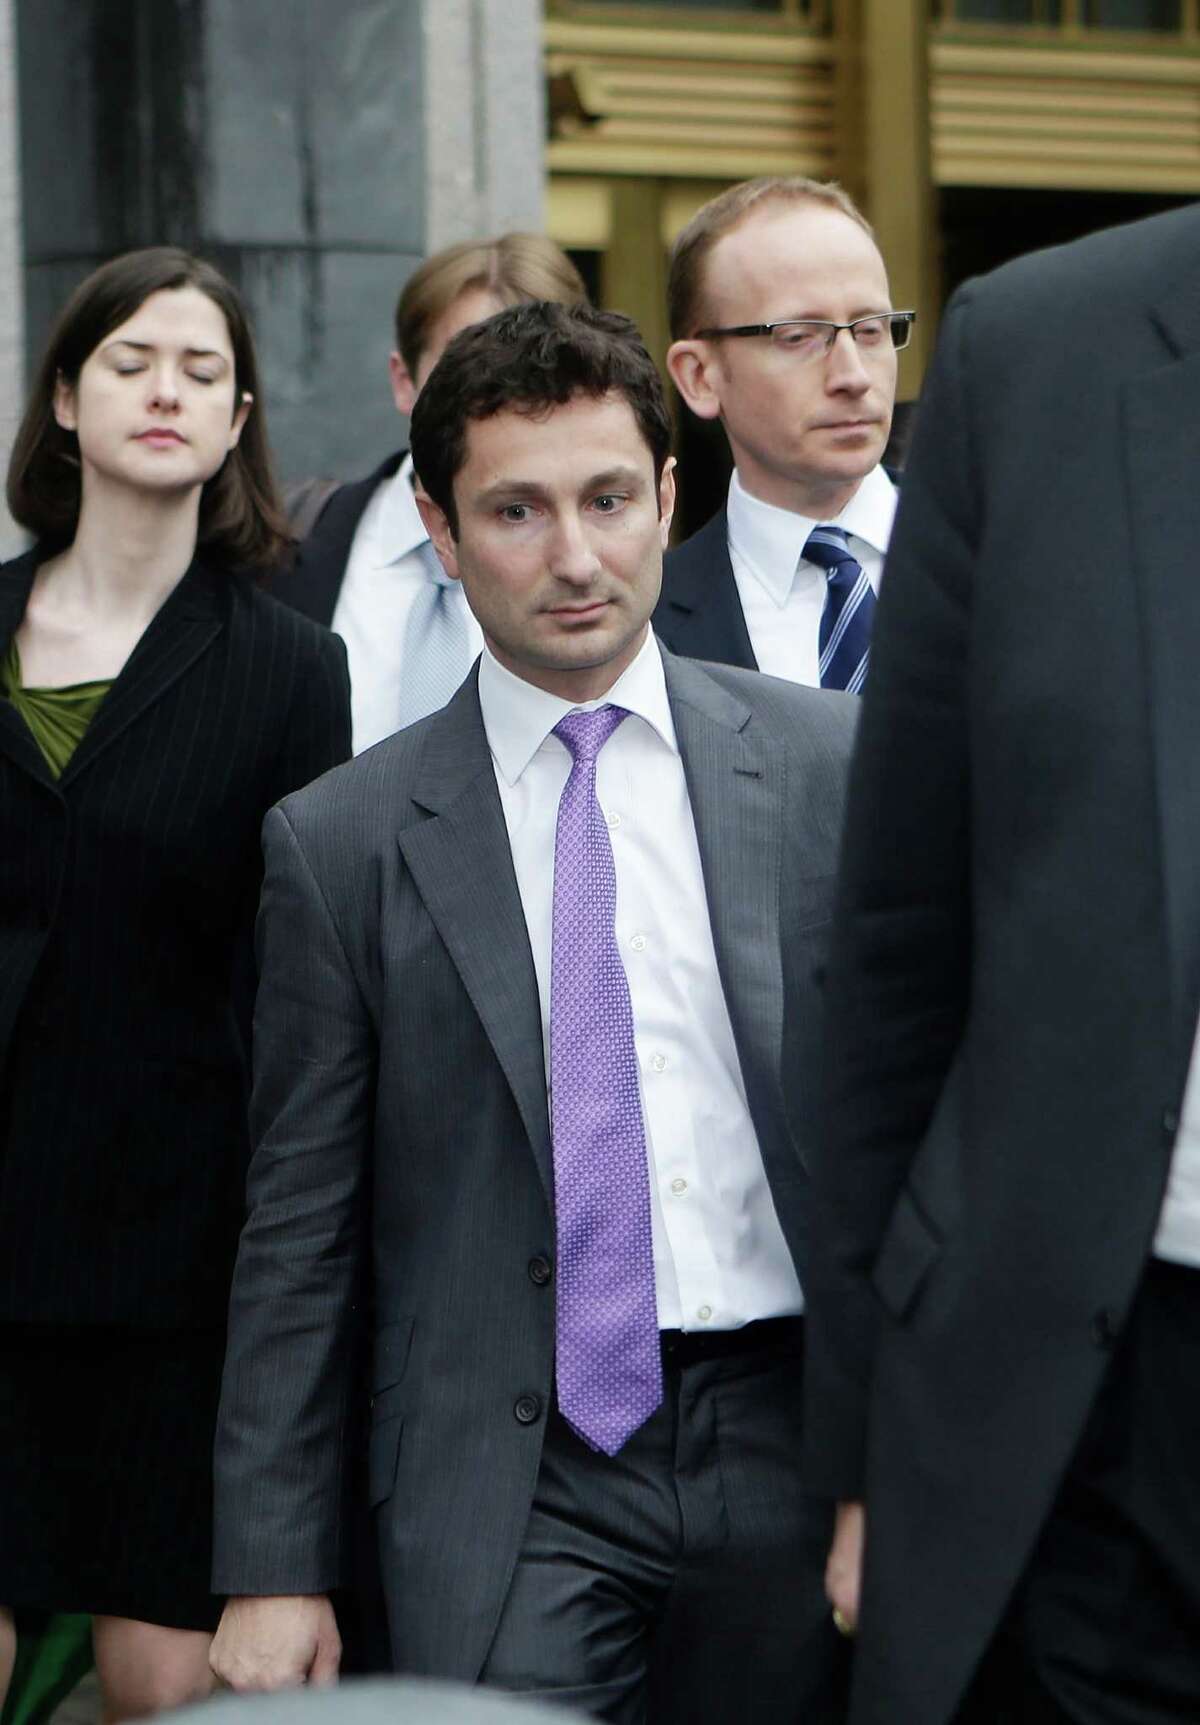 Former Goldman Sachs vice president Fabrice Tourre leaves Manhattan federal court with his attorneys, Thursday, Aug. 1, 2013, in New York. A New York City jury has found that the former trader known as "Fabulous Fab" is liable in a massive mortgage securities fraud case. (AP Photo/Frank Franklin II)